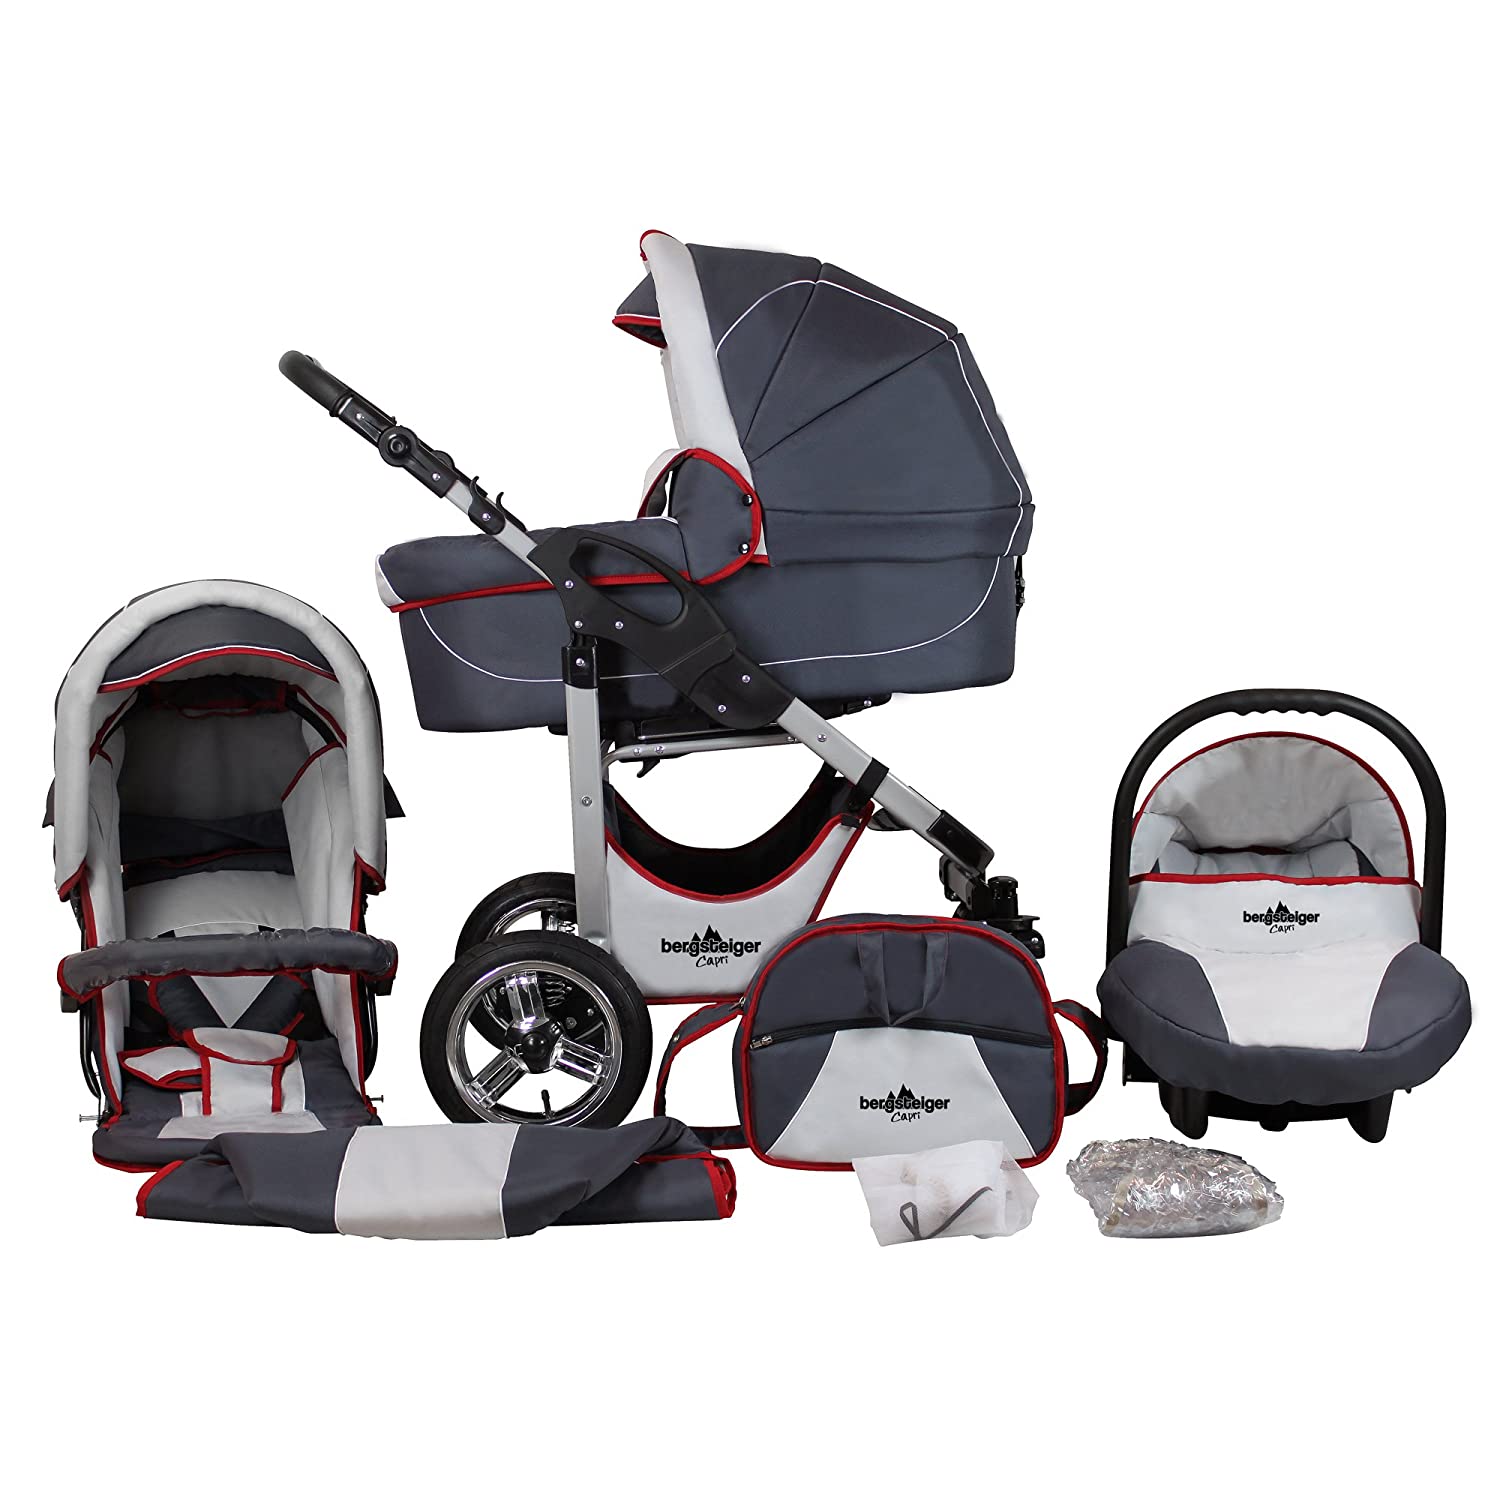 Bergsteiger Capri pushchair 3 in 1 combination pushchair Megaset 10 parts incl. Baby seat, baby carriage, sports pram and accessories.